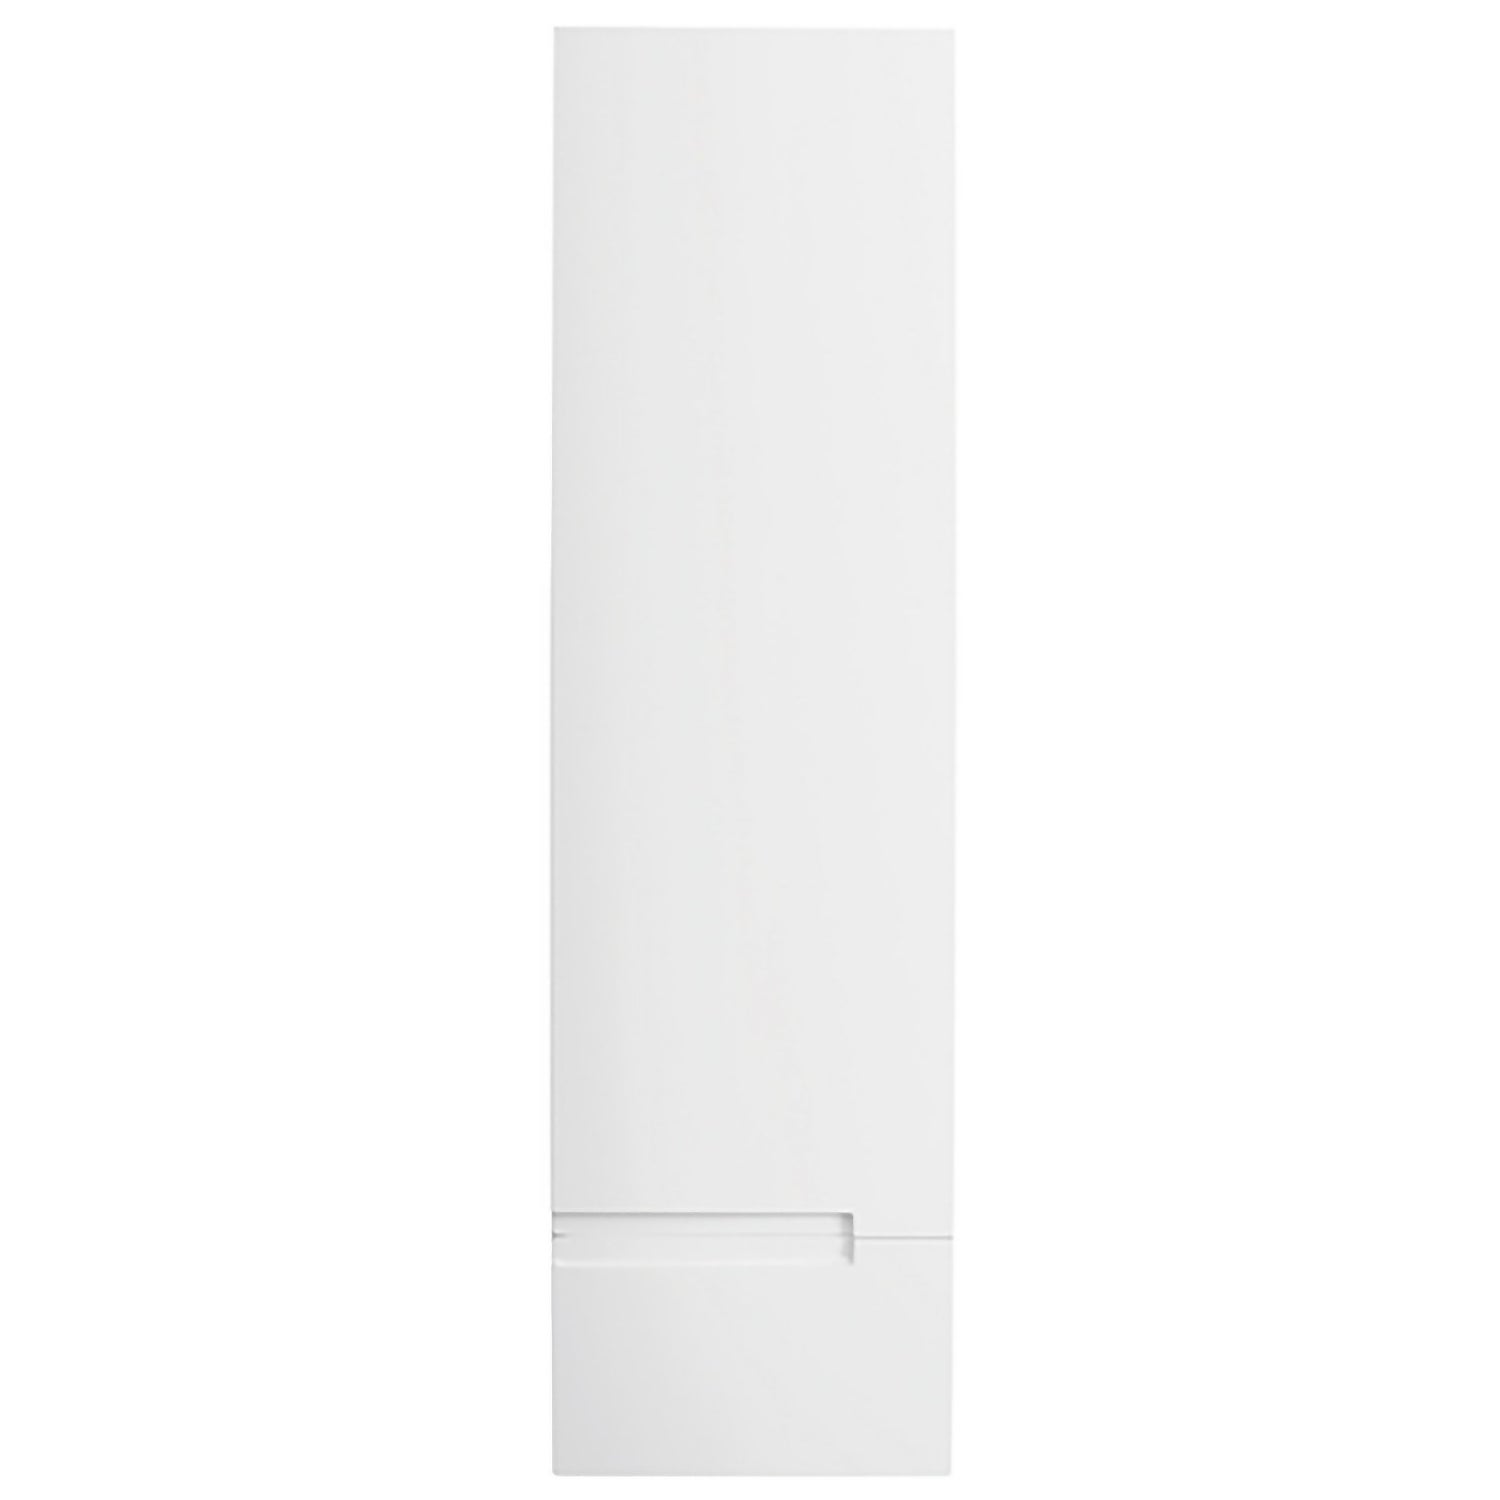 Vermont Tall Wall Mounted Storage Unit - Right Hand - Gloss White